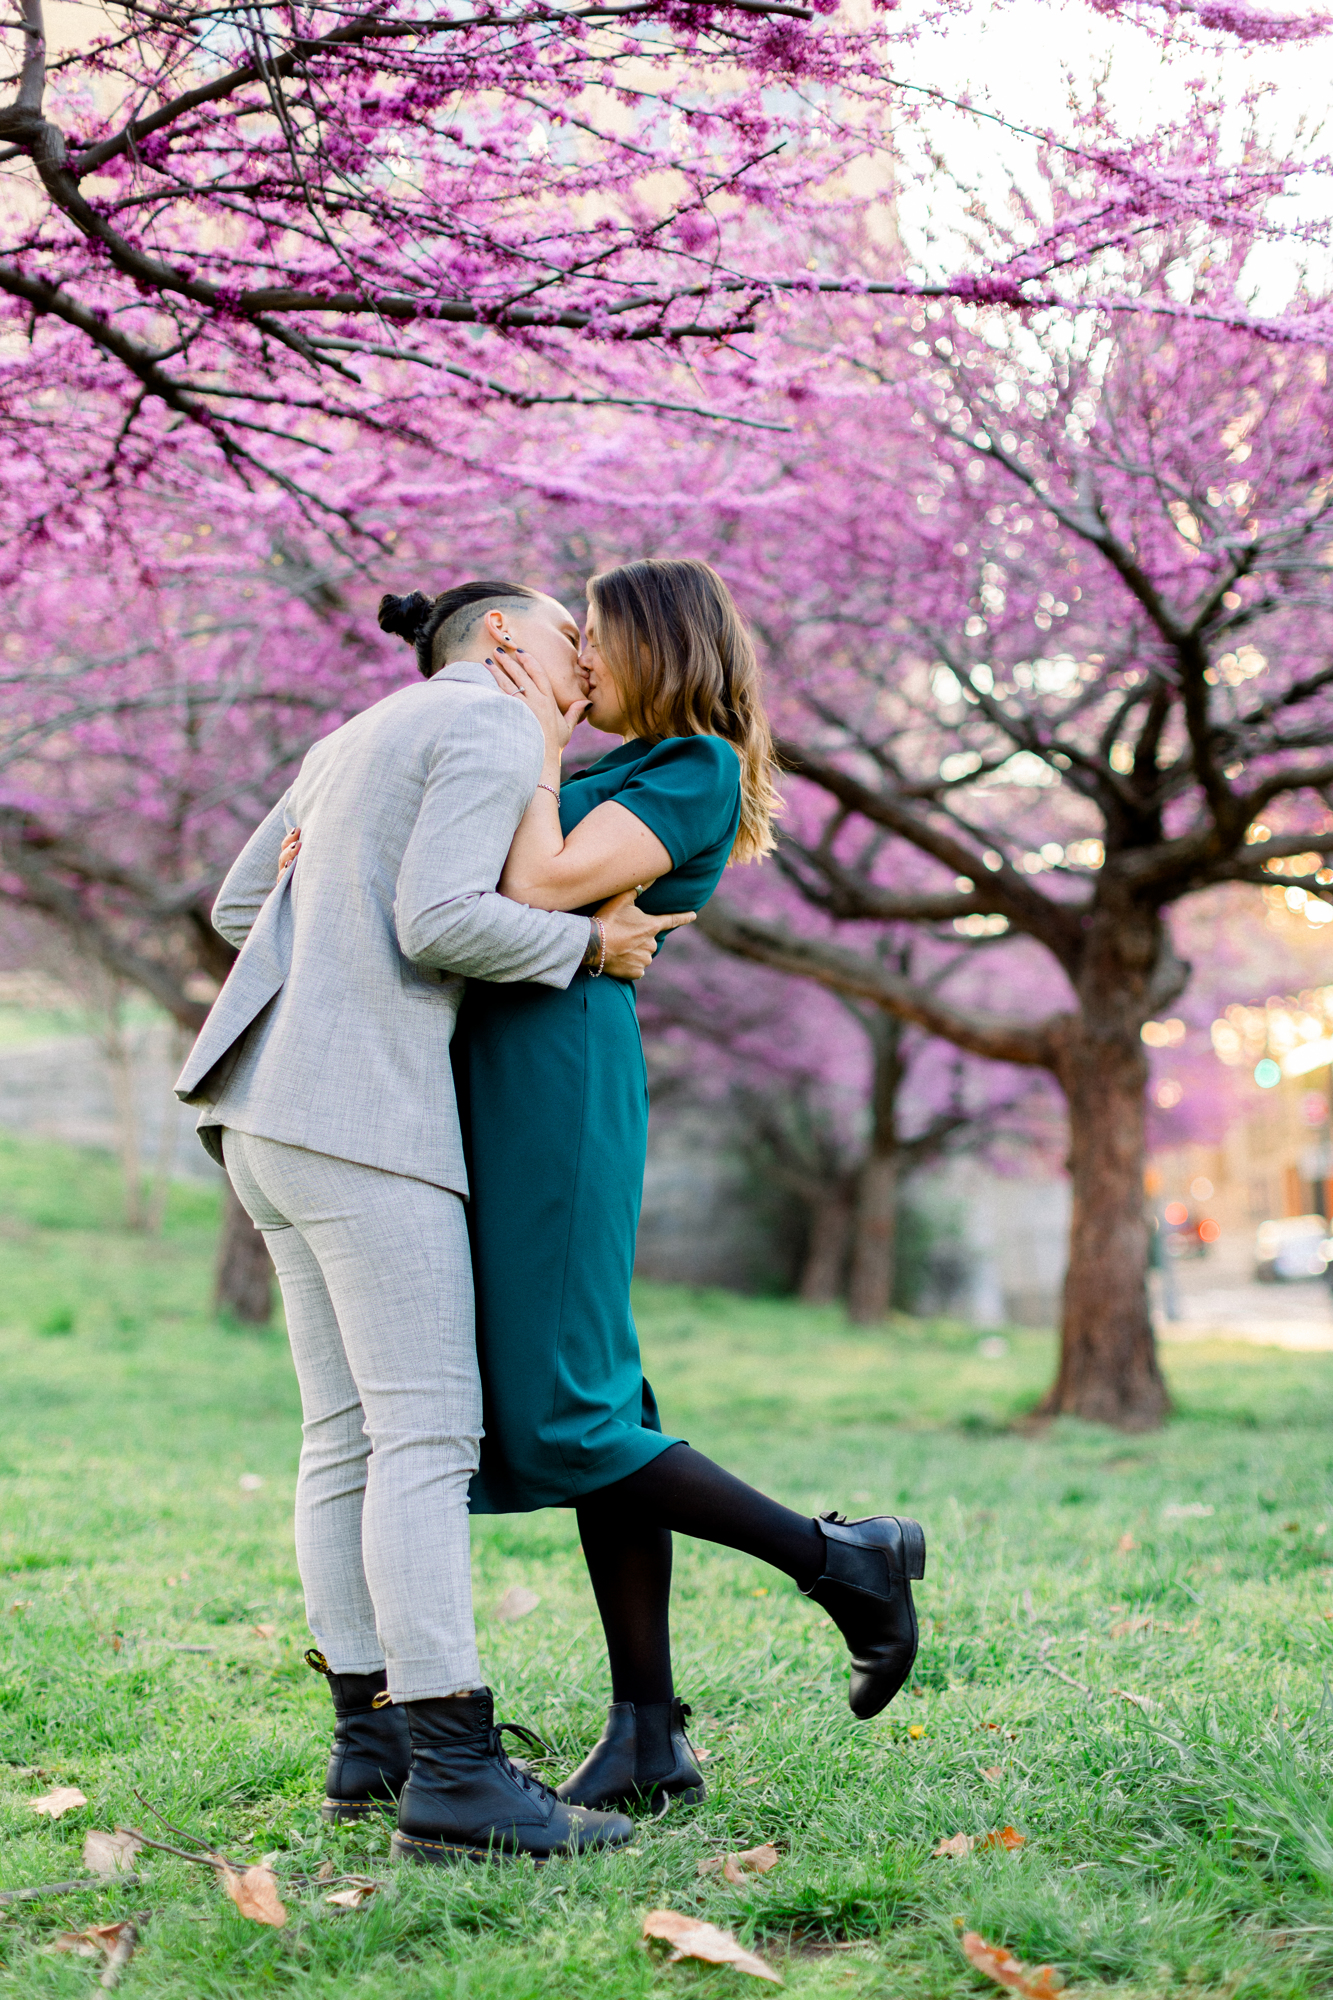 Romantic Engagement Shoot in NYC